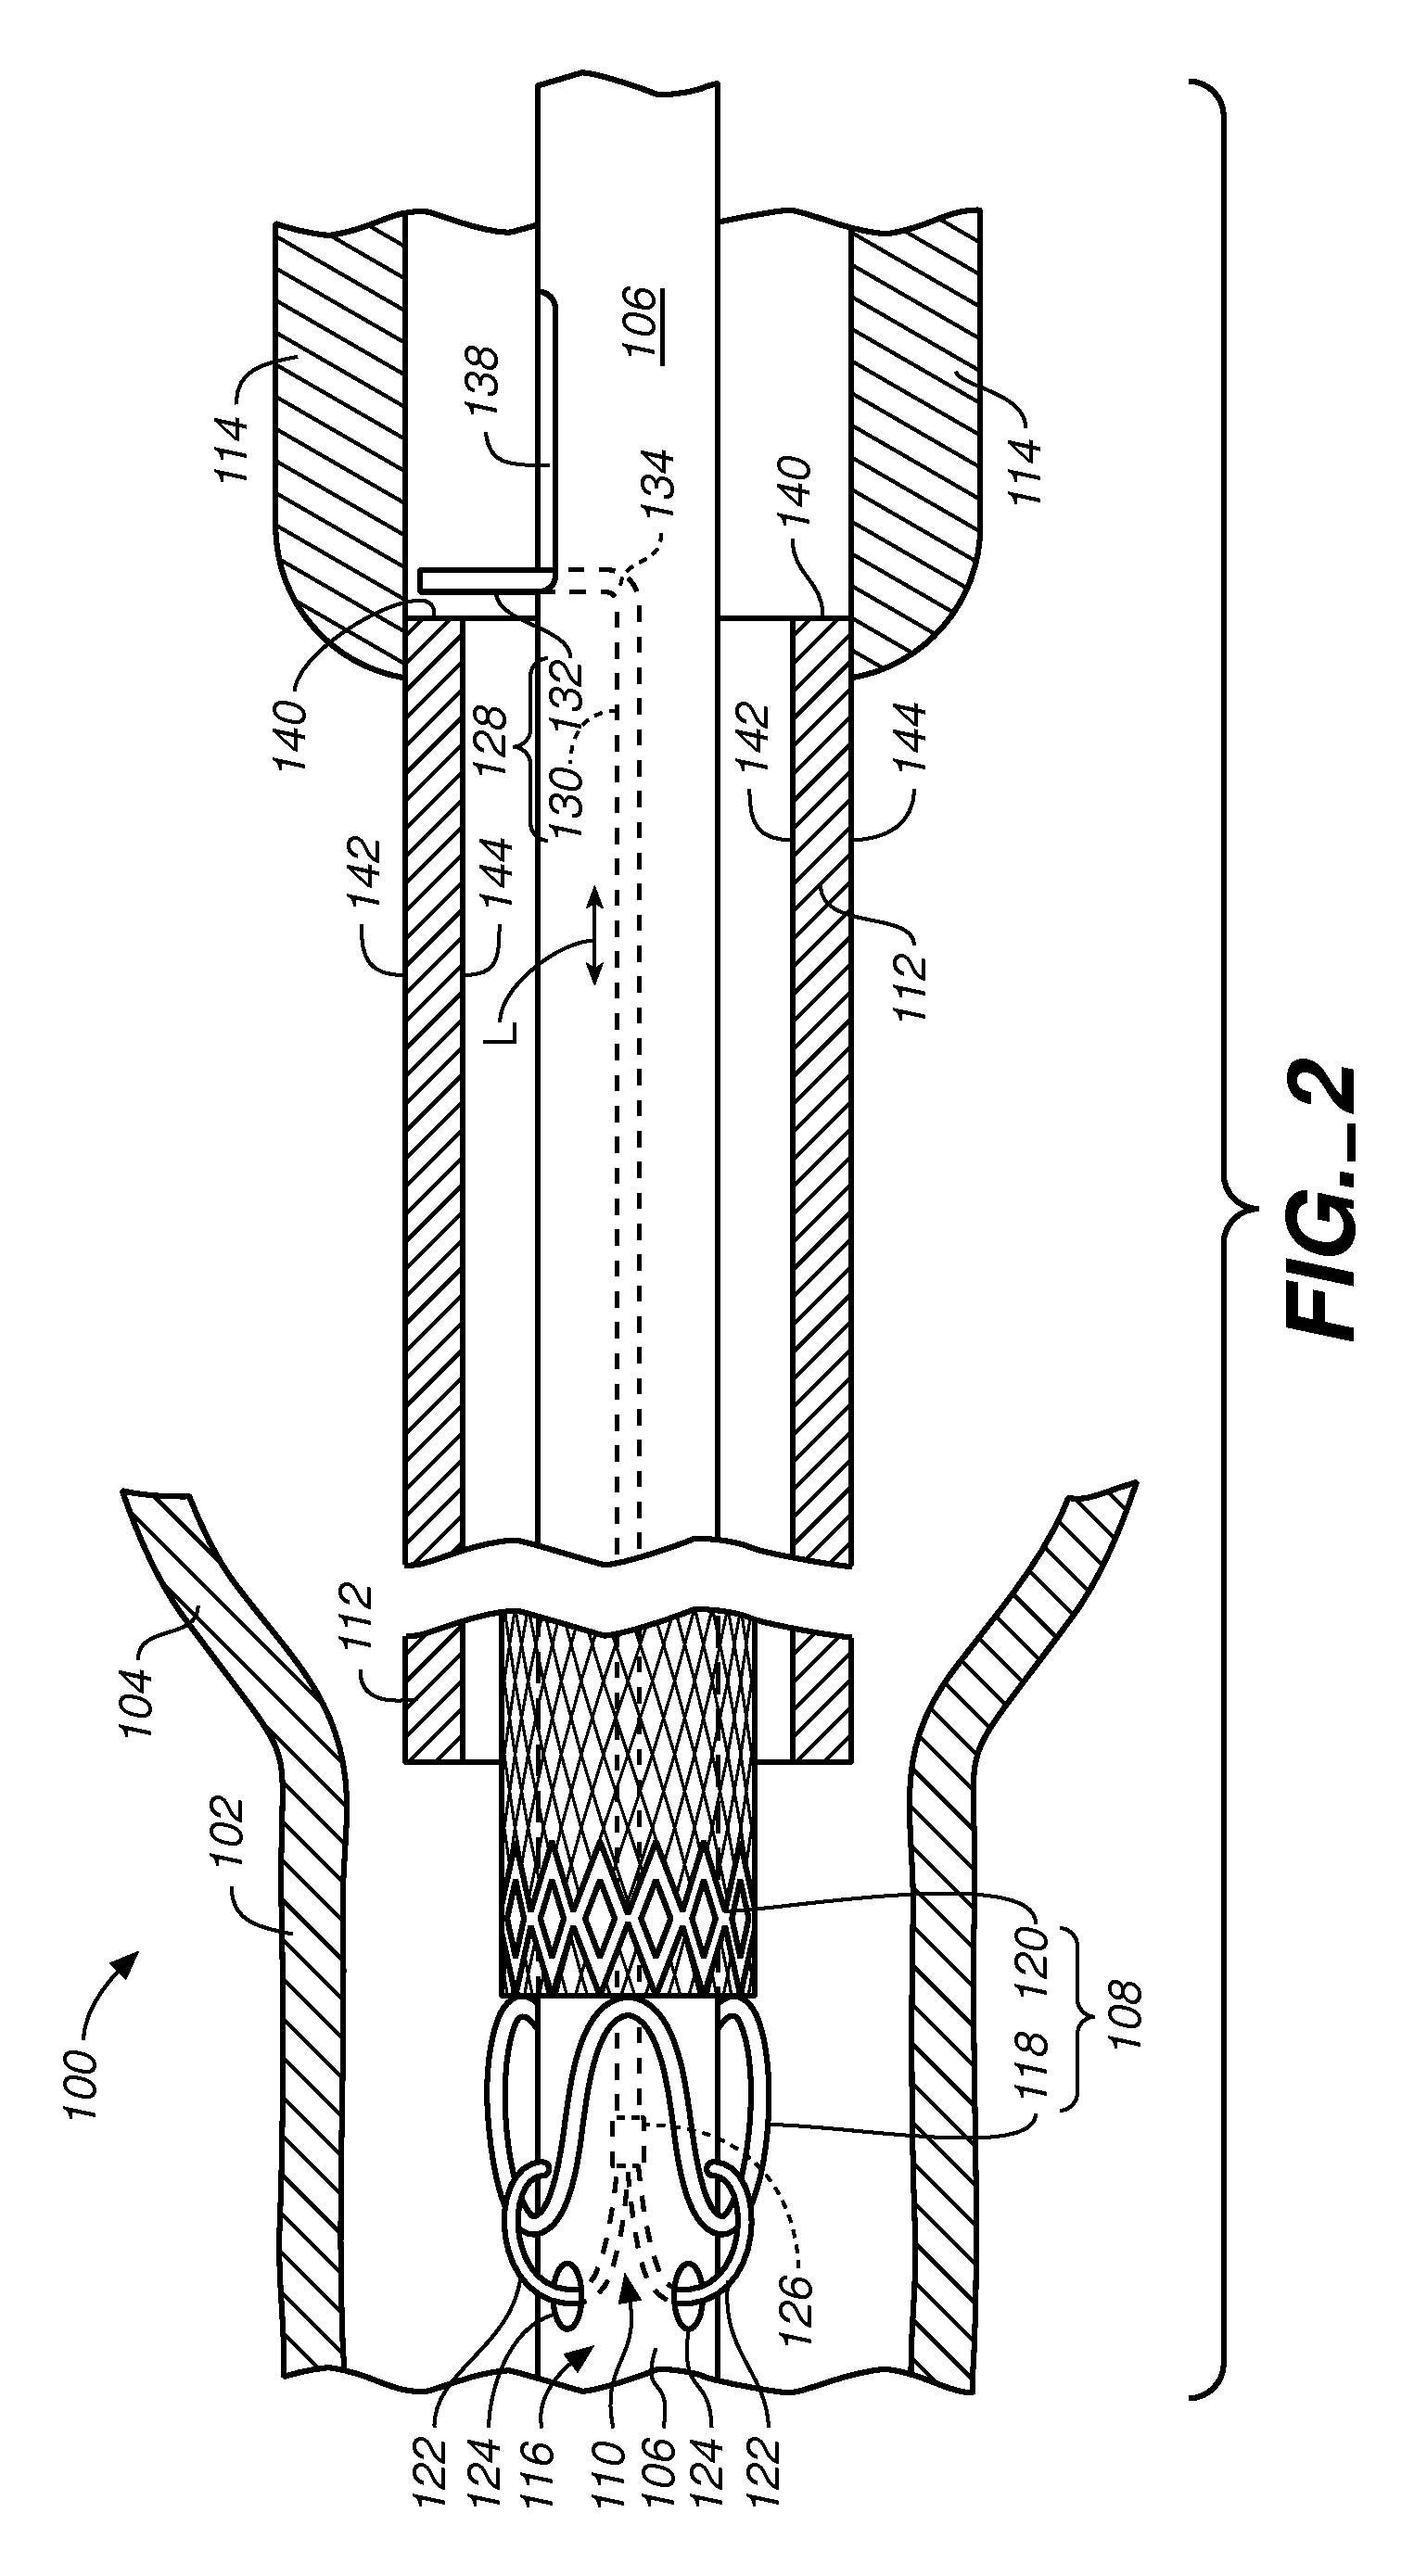 Stent-graft delivery system